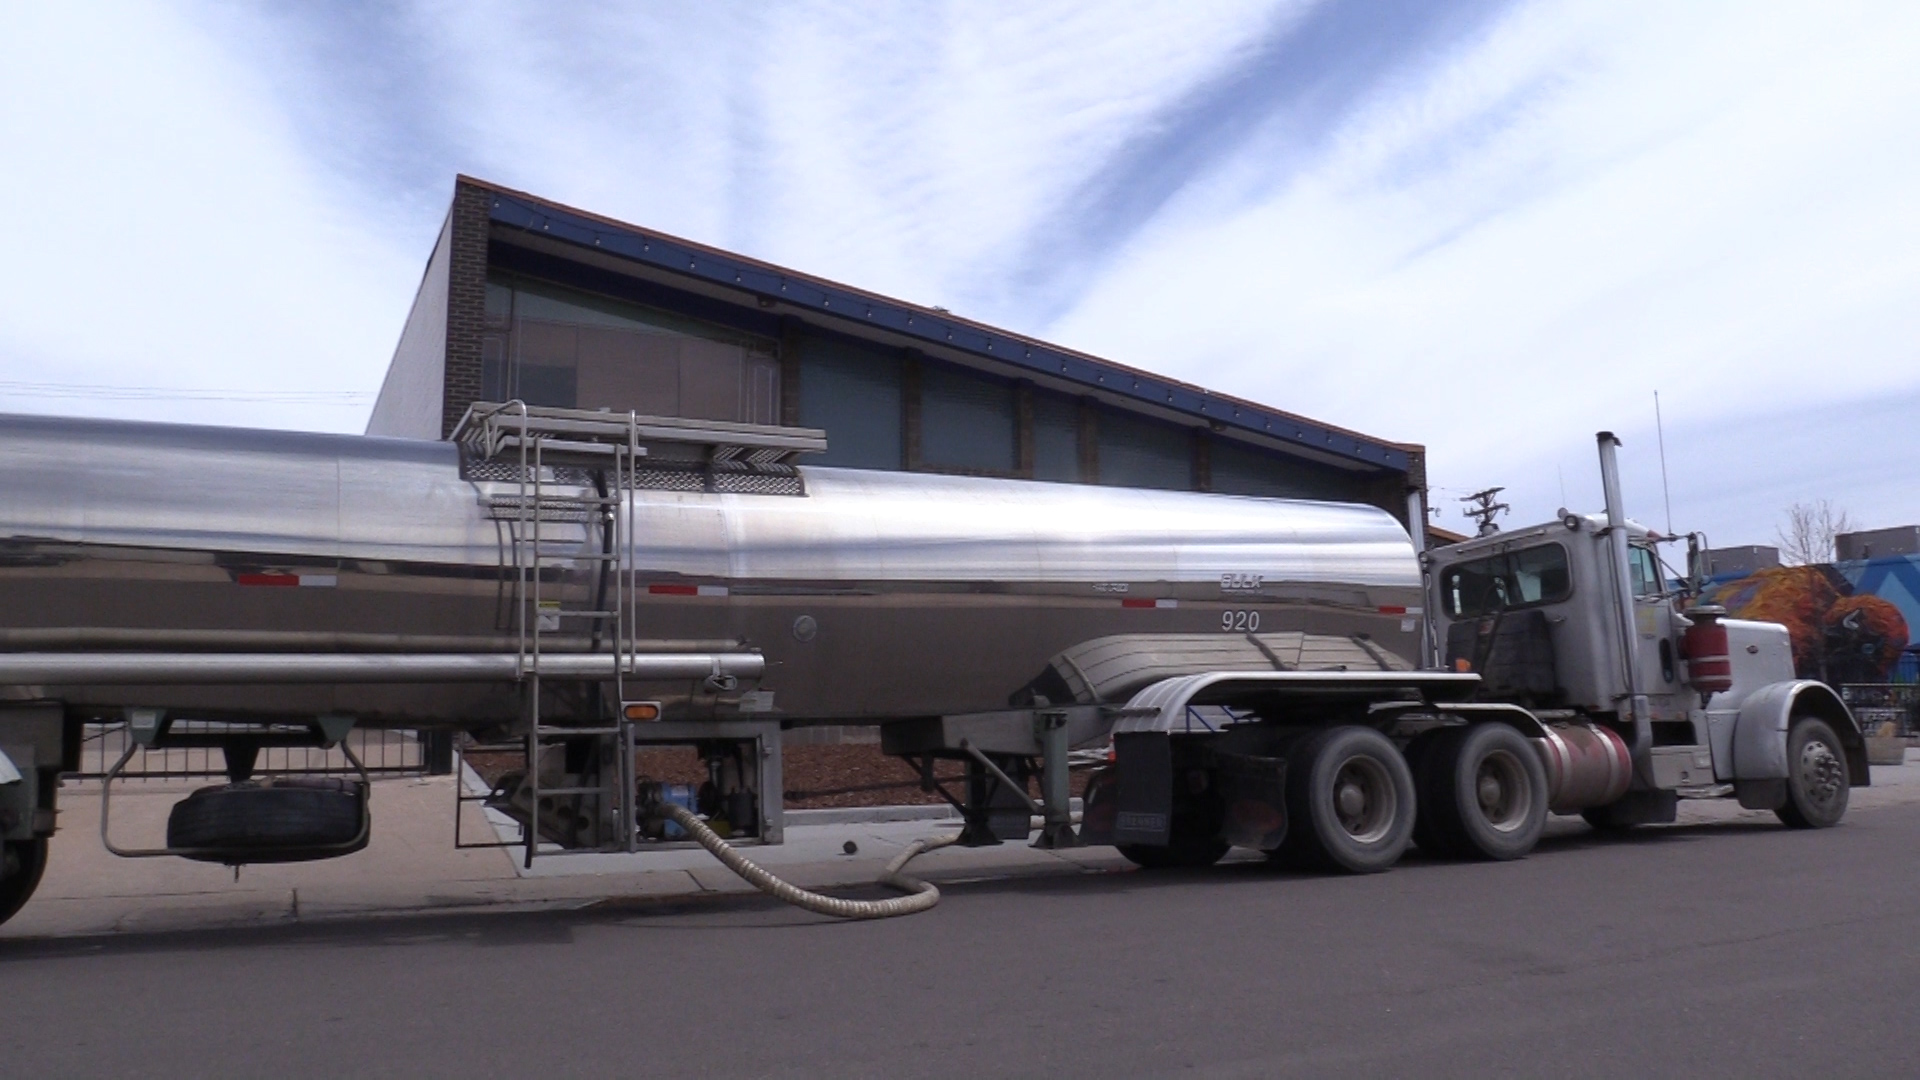 A tanker truck delivers 4,000 gallons of purified water to Declaration Brewery.